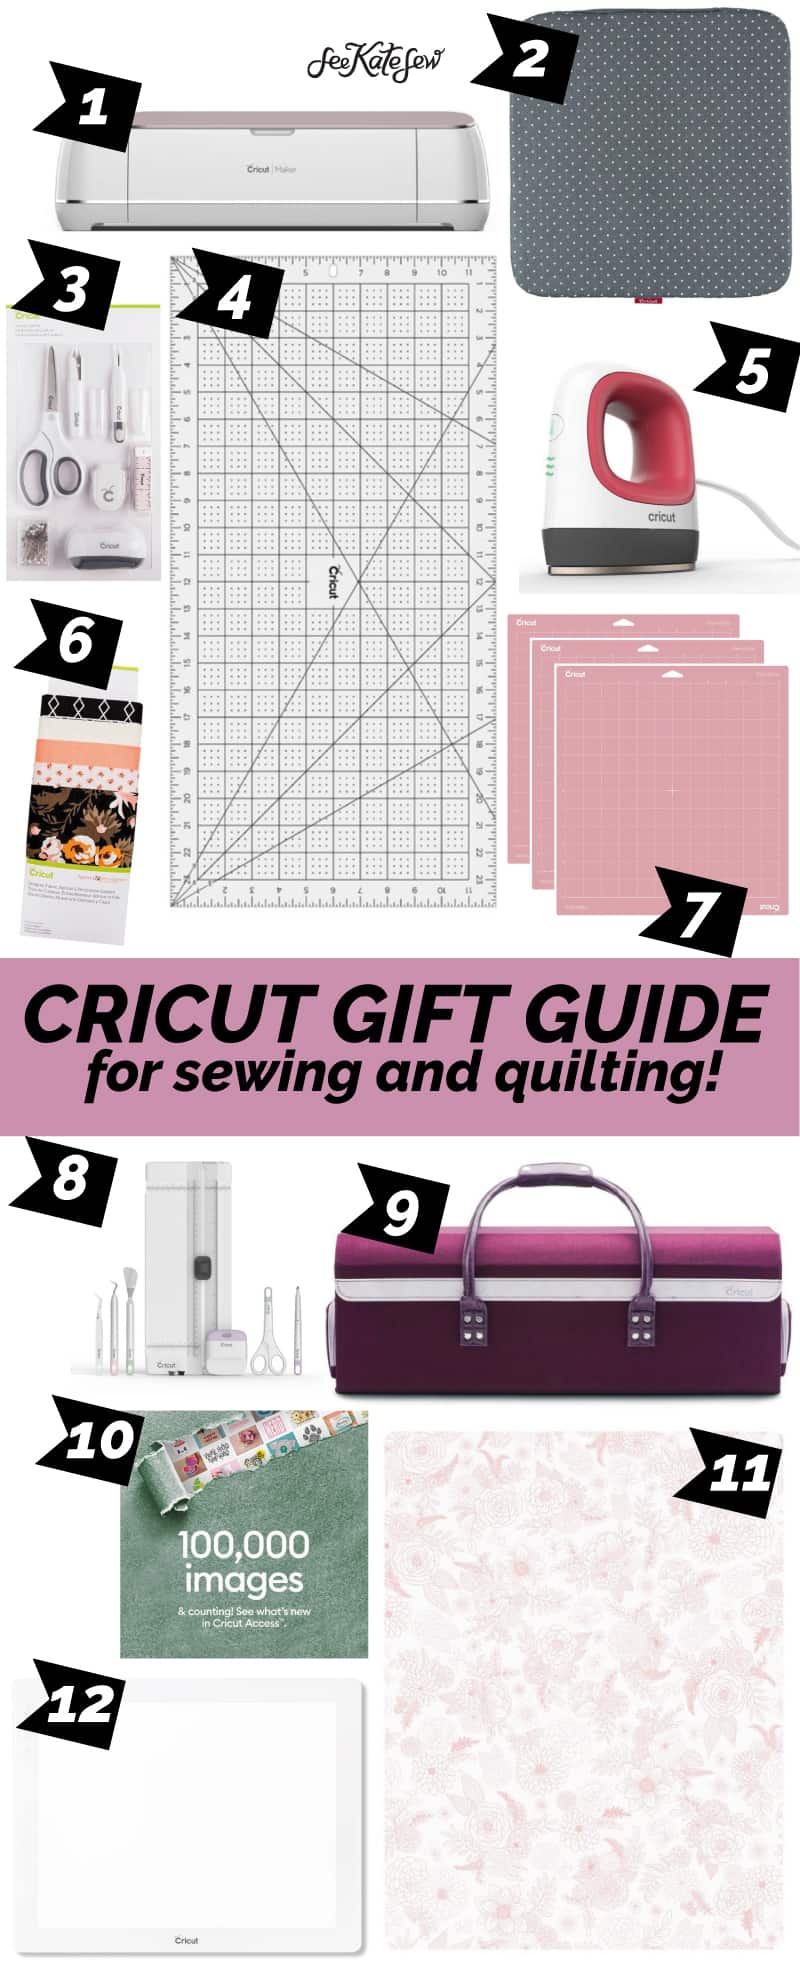 Cricut supplies that are perfect for the sewing, crafter, and quilter on your list! Here are my top 12 favorite Cricut supplies. || See Kate Sew #giftguide #cricut #cricutsupplies #cricutgifts #sewinggifts #craftgifts #quiltergifts #seekatesew